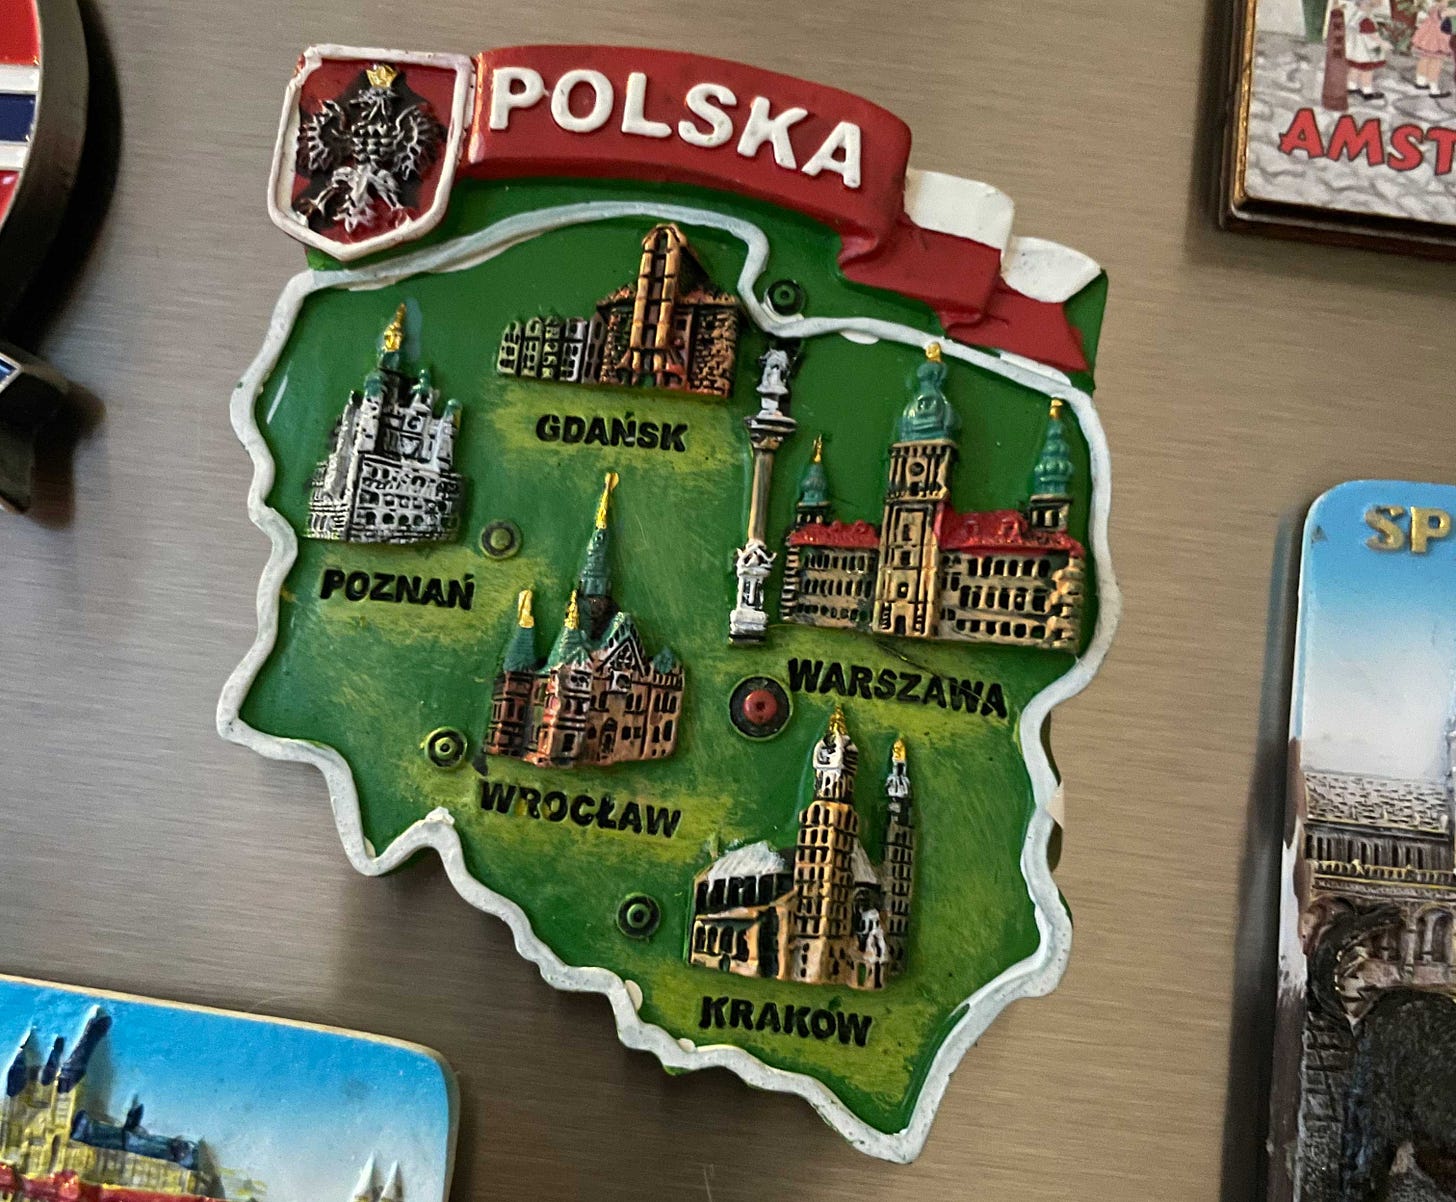 Magnet from Poland on a refrigerator.